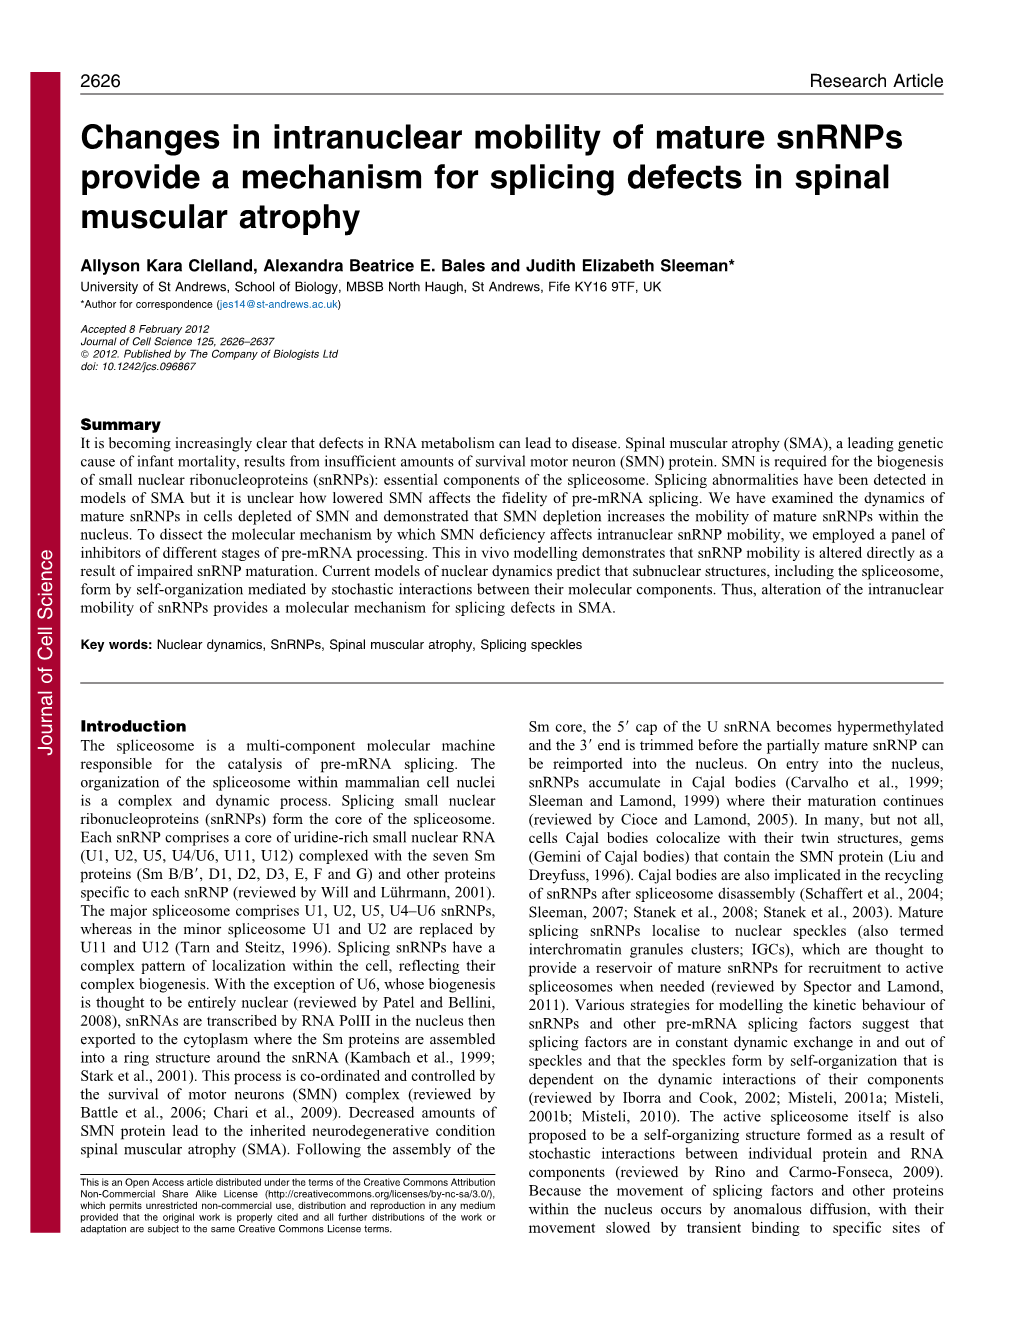 Changes in Intranuclear Mobility of Mature Snrnps Provide a Mechanism for Splicing Defects in Spinal Muscular Atrophy